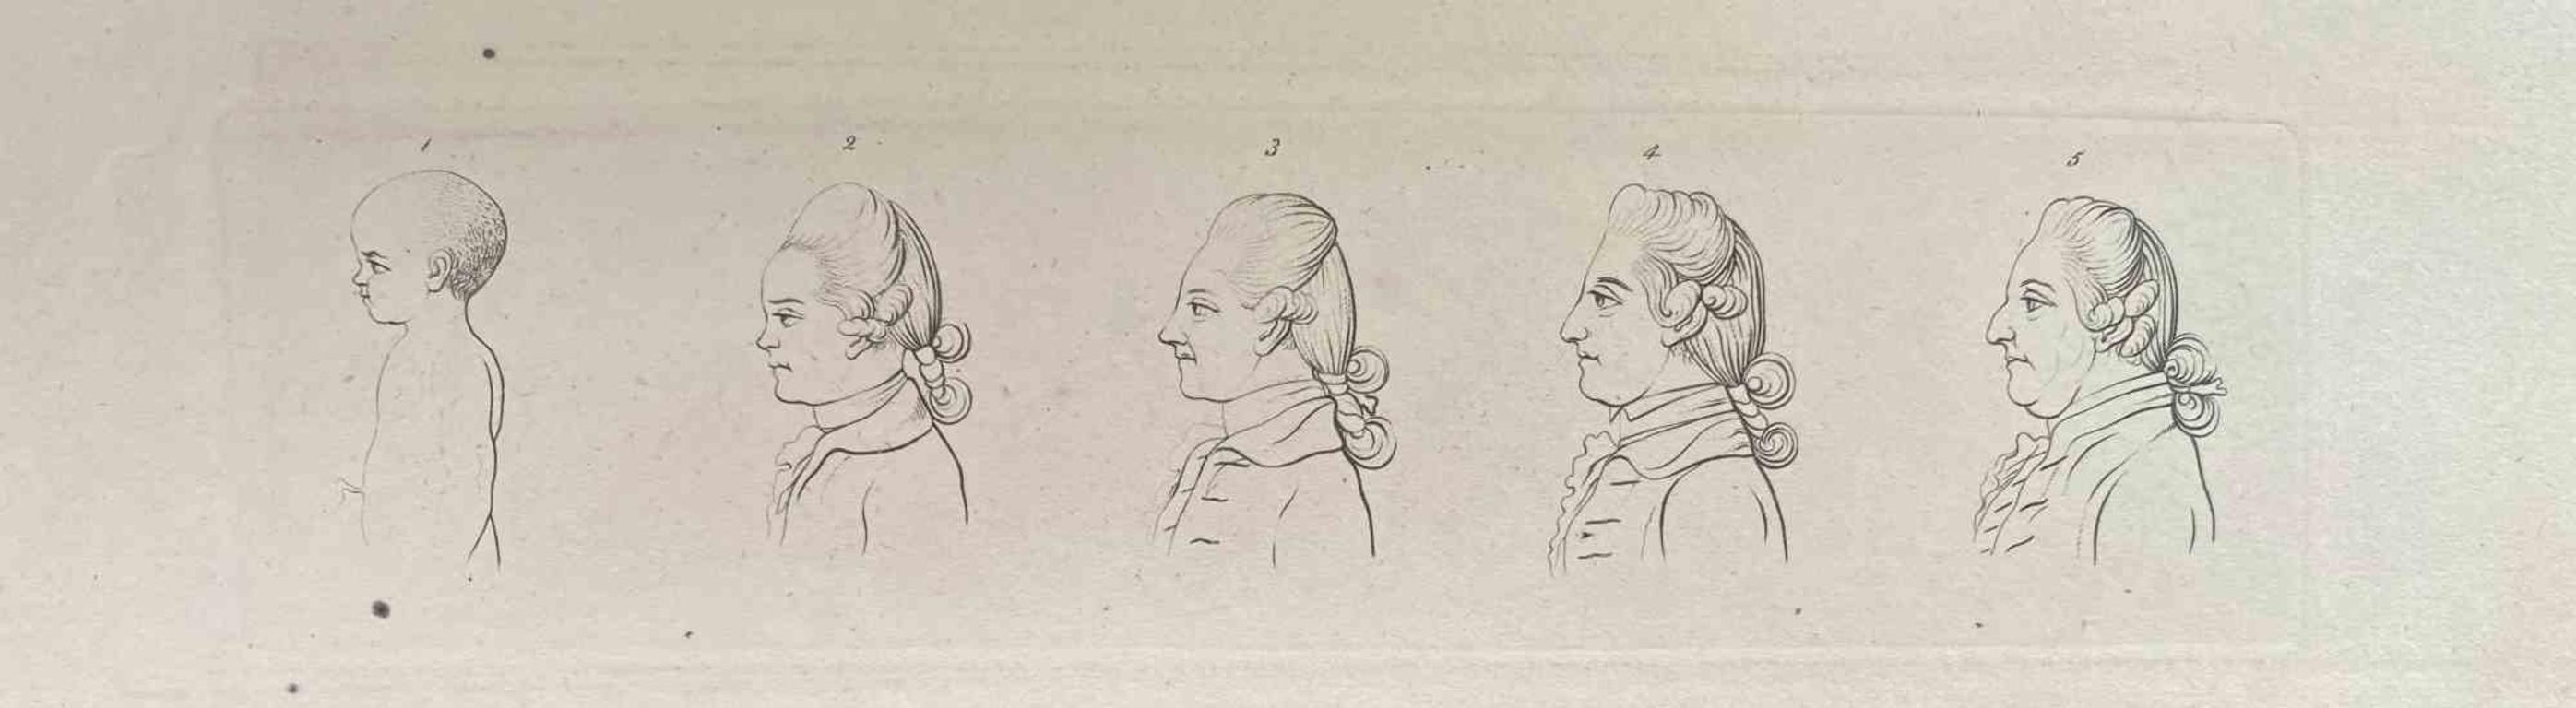 Head of a Man Throughout the Years is an original artwork realized by Thomas Holloway for Johann Caspar Lavater's  "Essays on Physiognomy, Designed to promote the Knowledge and the Love of Mankind", London, Bensley, 1810. 

 This artwork portrays